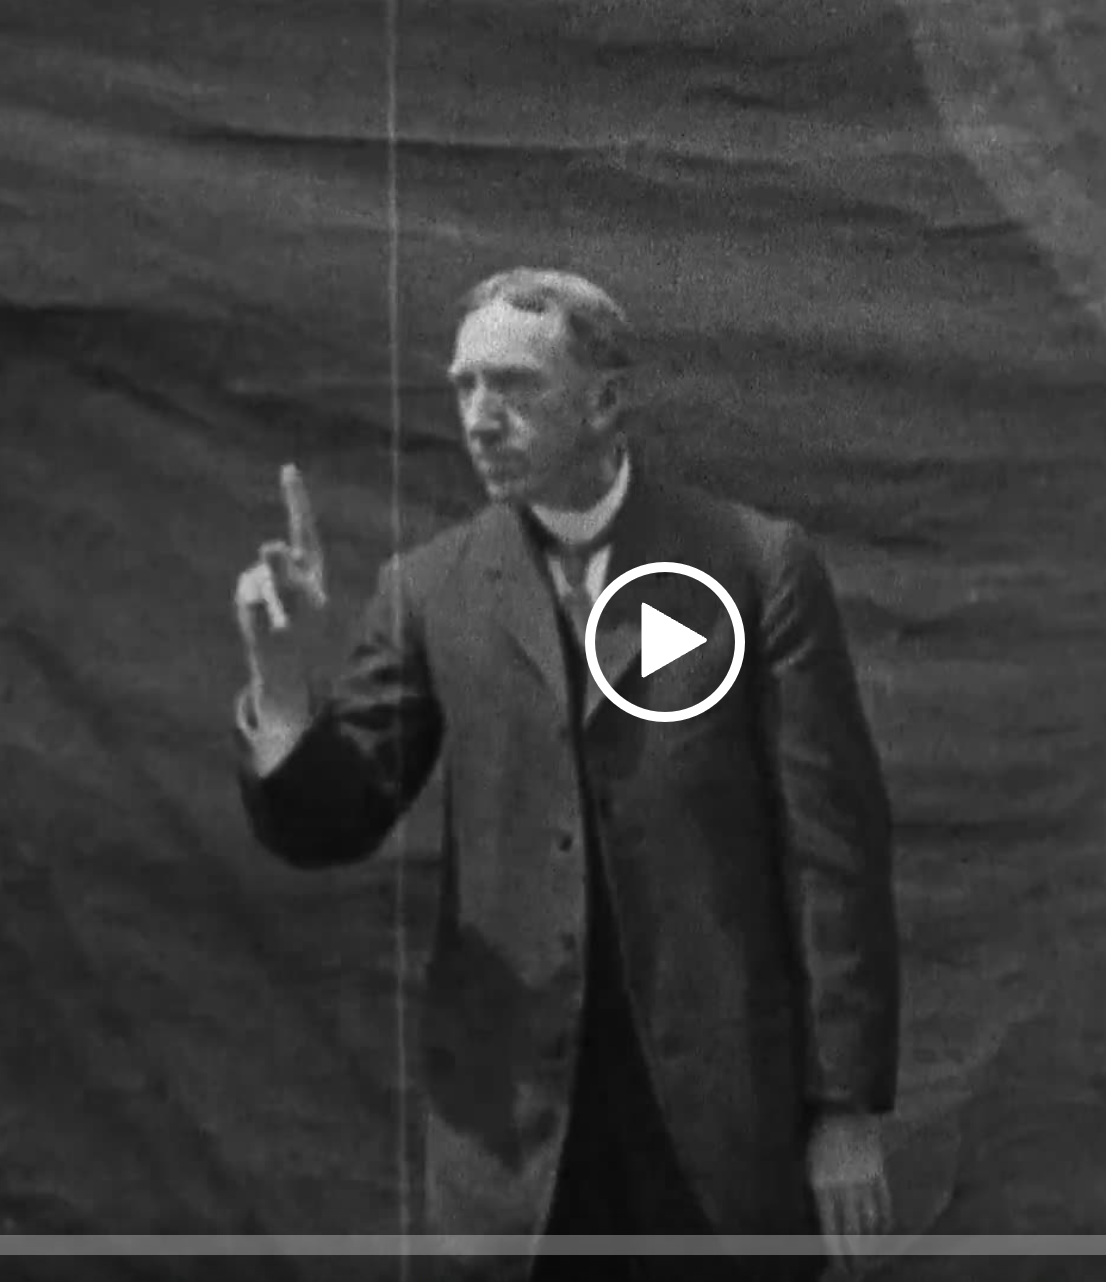 Screen cap from a film of George Veditz wearing a suit and giving a speech in American Sign Language. 